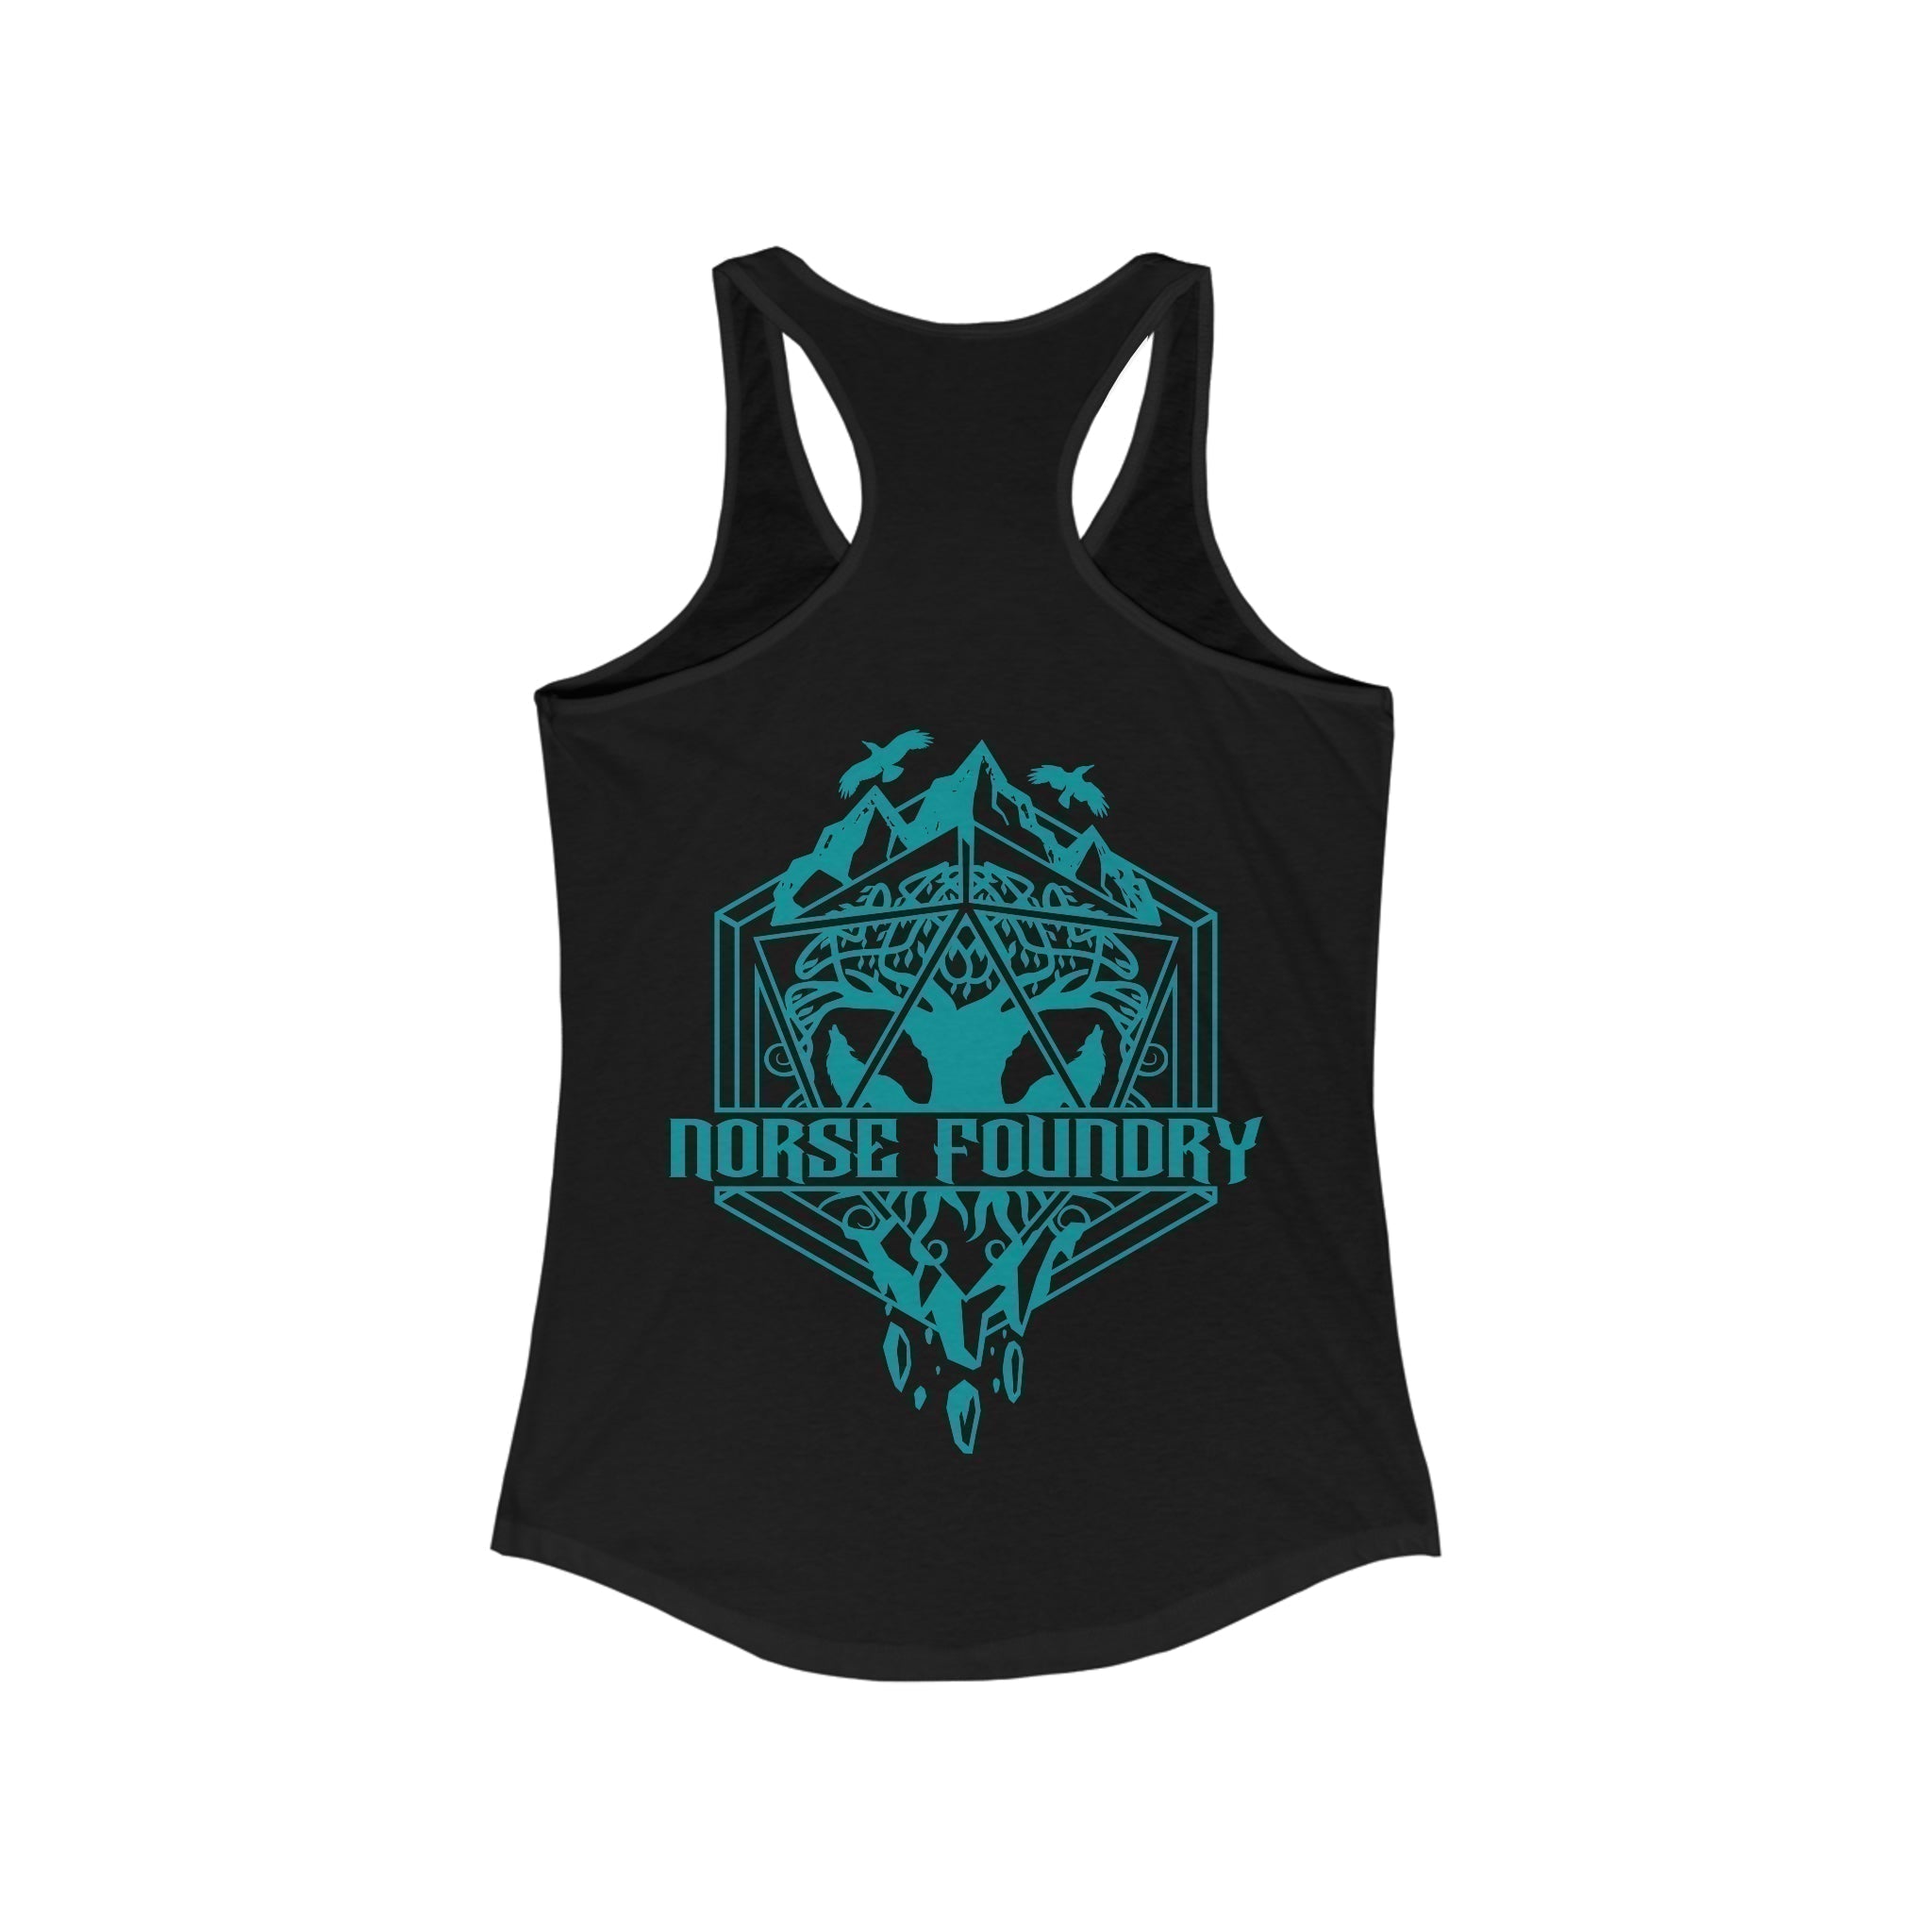 Roll for Adventure - Norse Foundry Women's Tank Top - 24130775065395196737